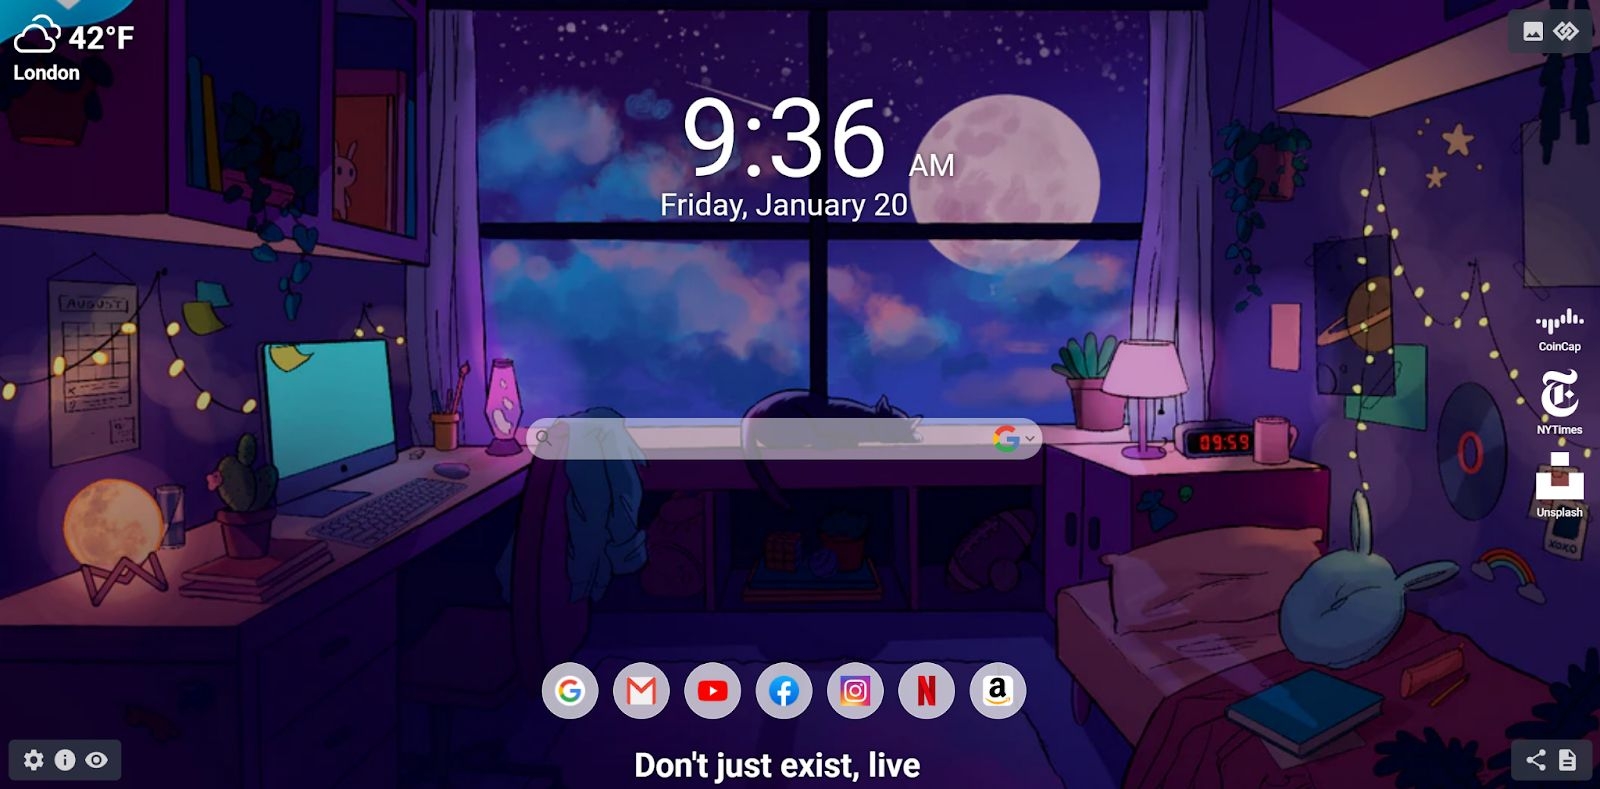 Embracing the Lofi Girl Aesthetic: Finding Tranquility with MeaVana Chrome Extension